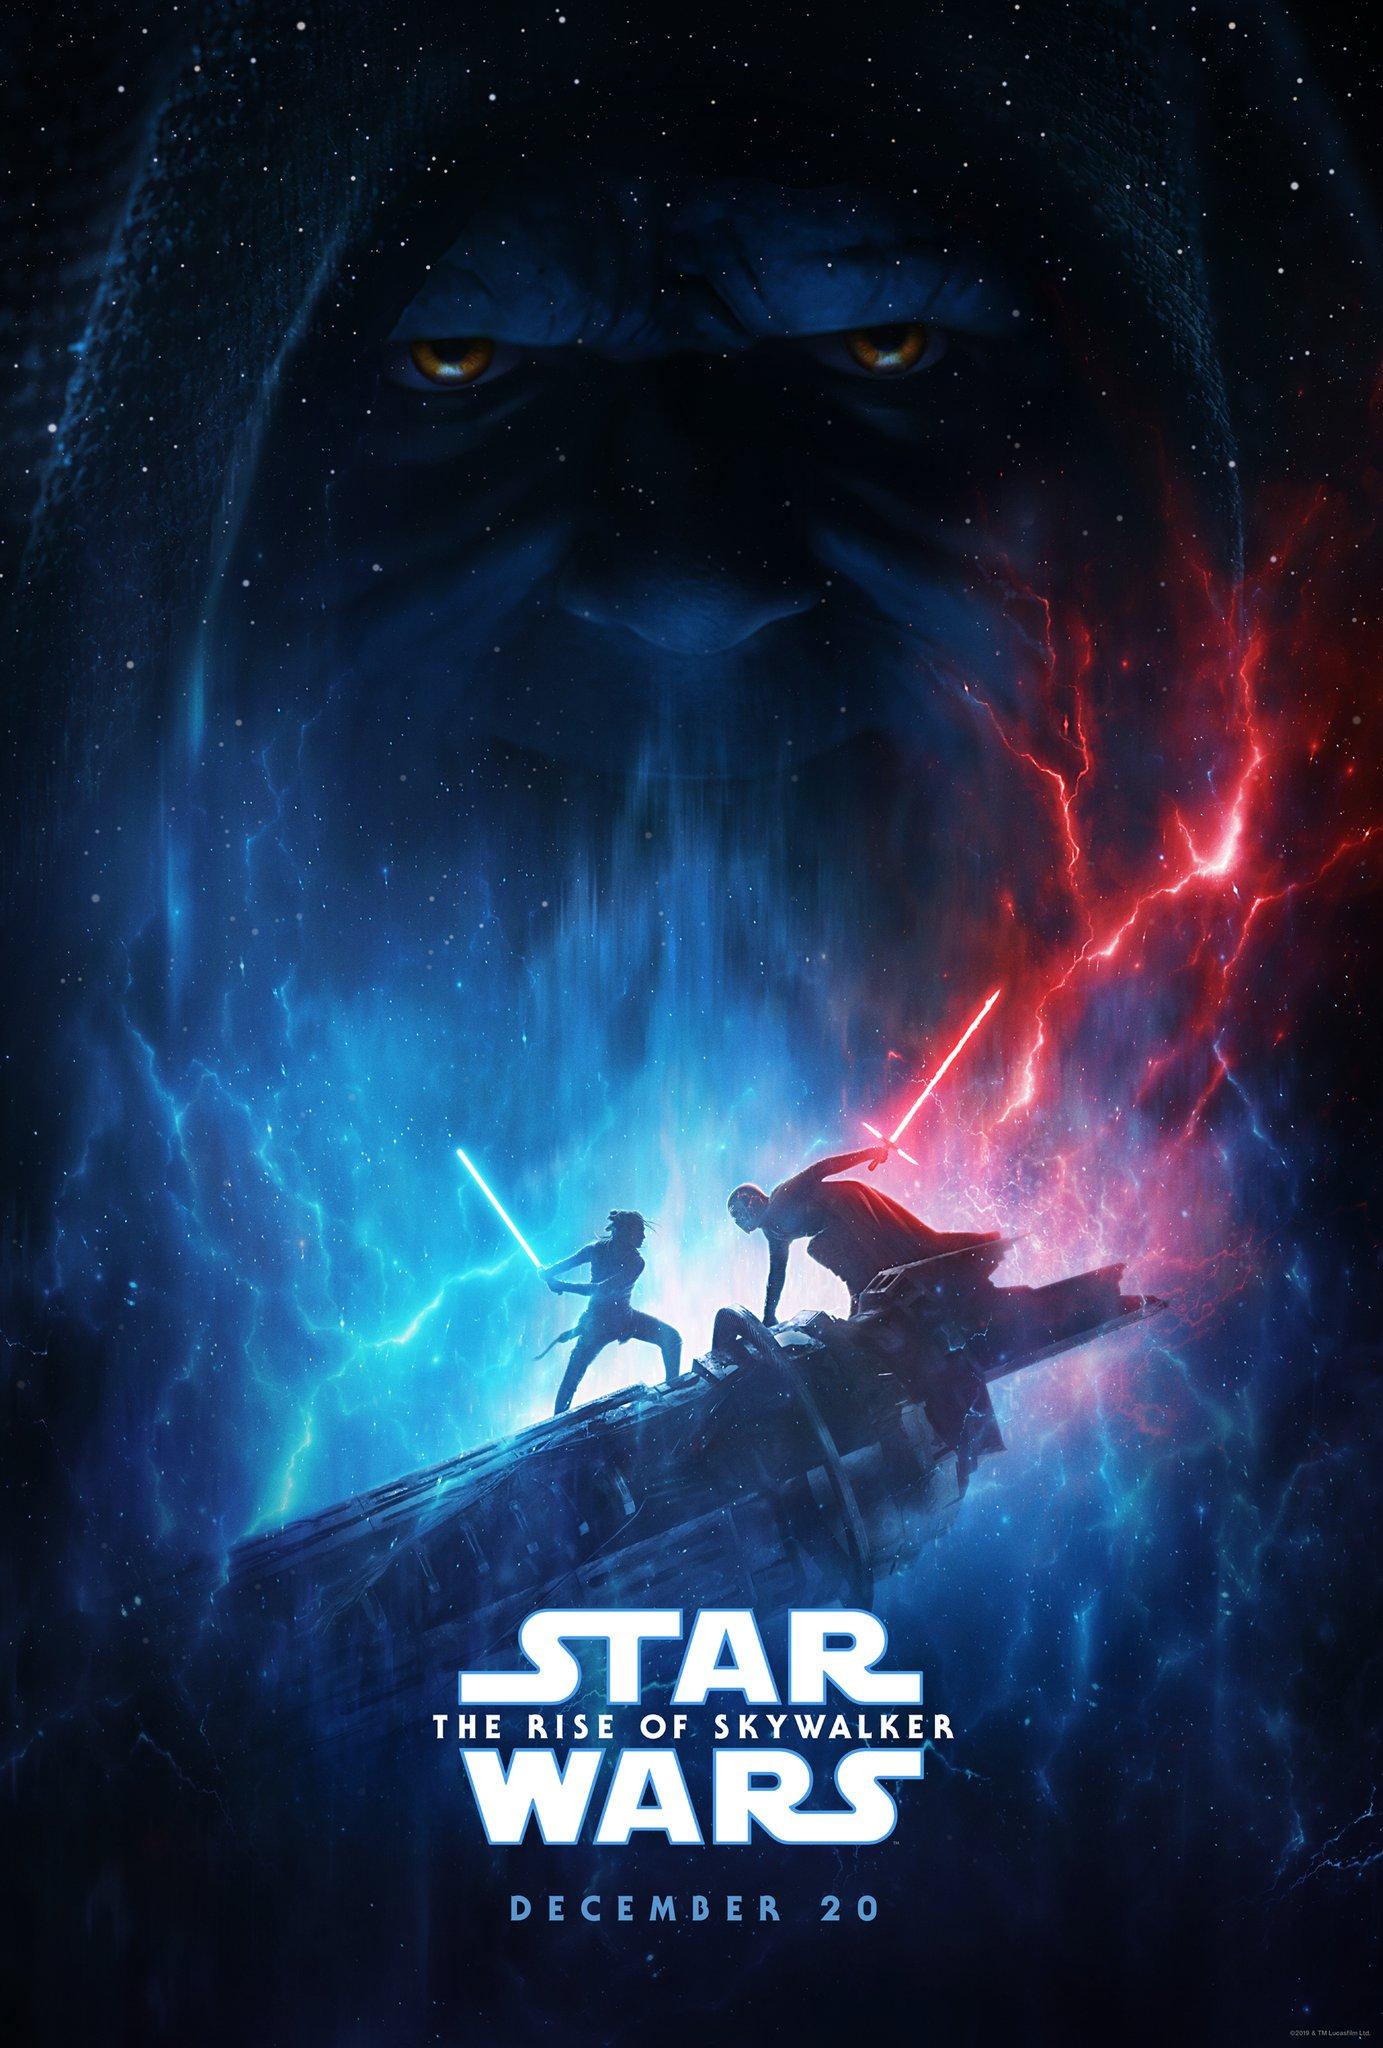 New Star Wars: The Rise of Skywalker Poster Shown